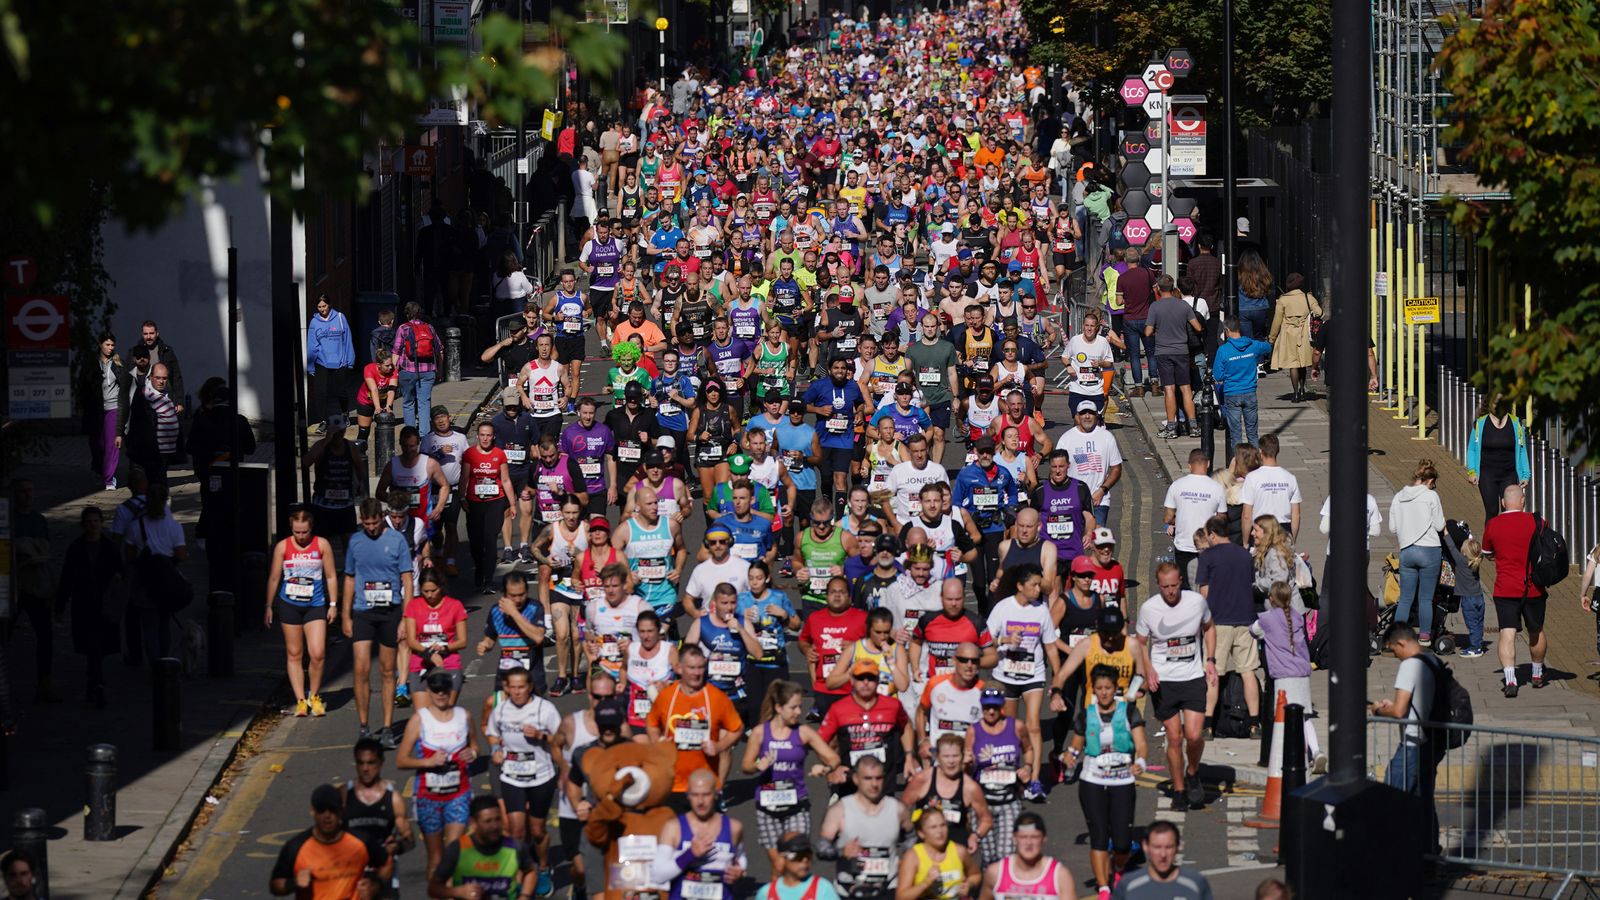 london-marathon-man-36-dies-after-collapsing-less-than-three-miles-from-end